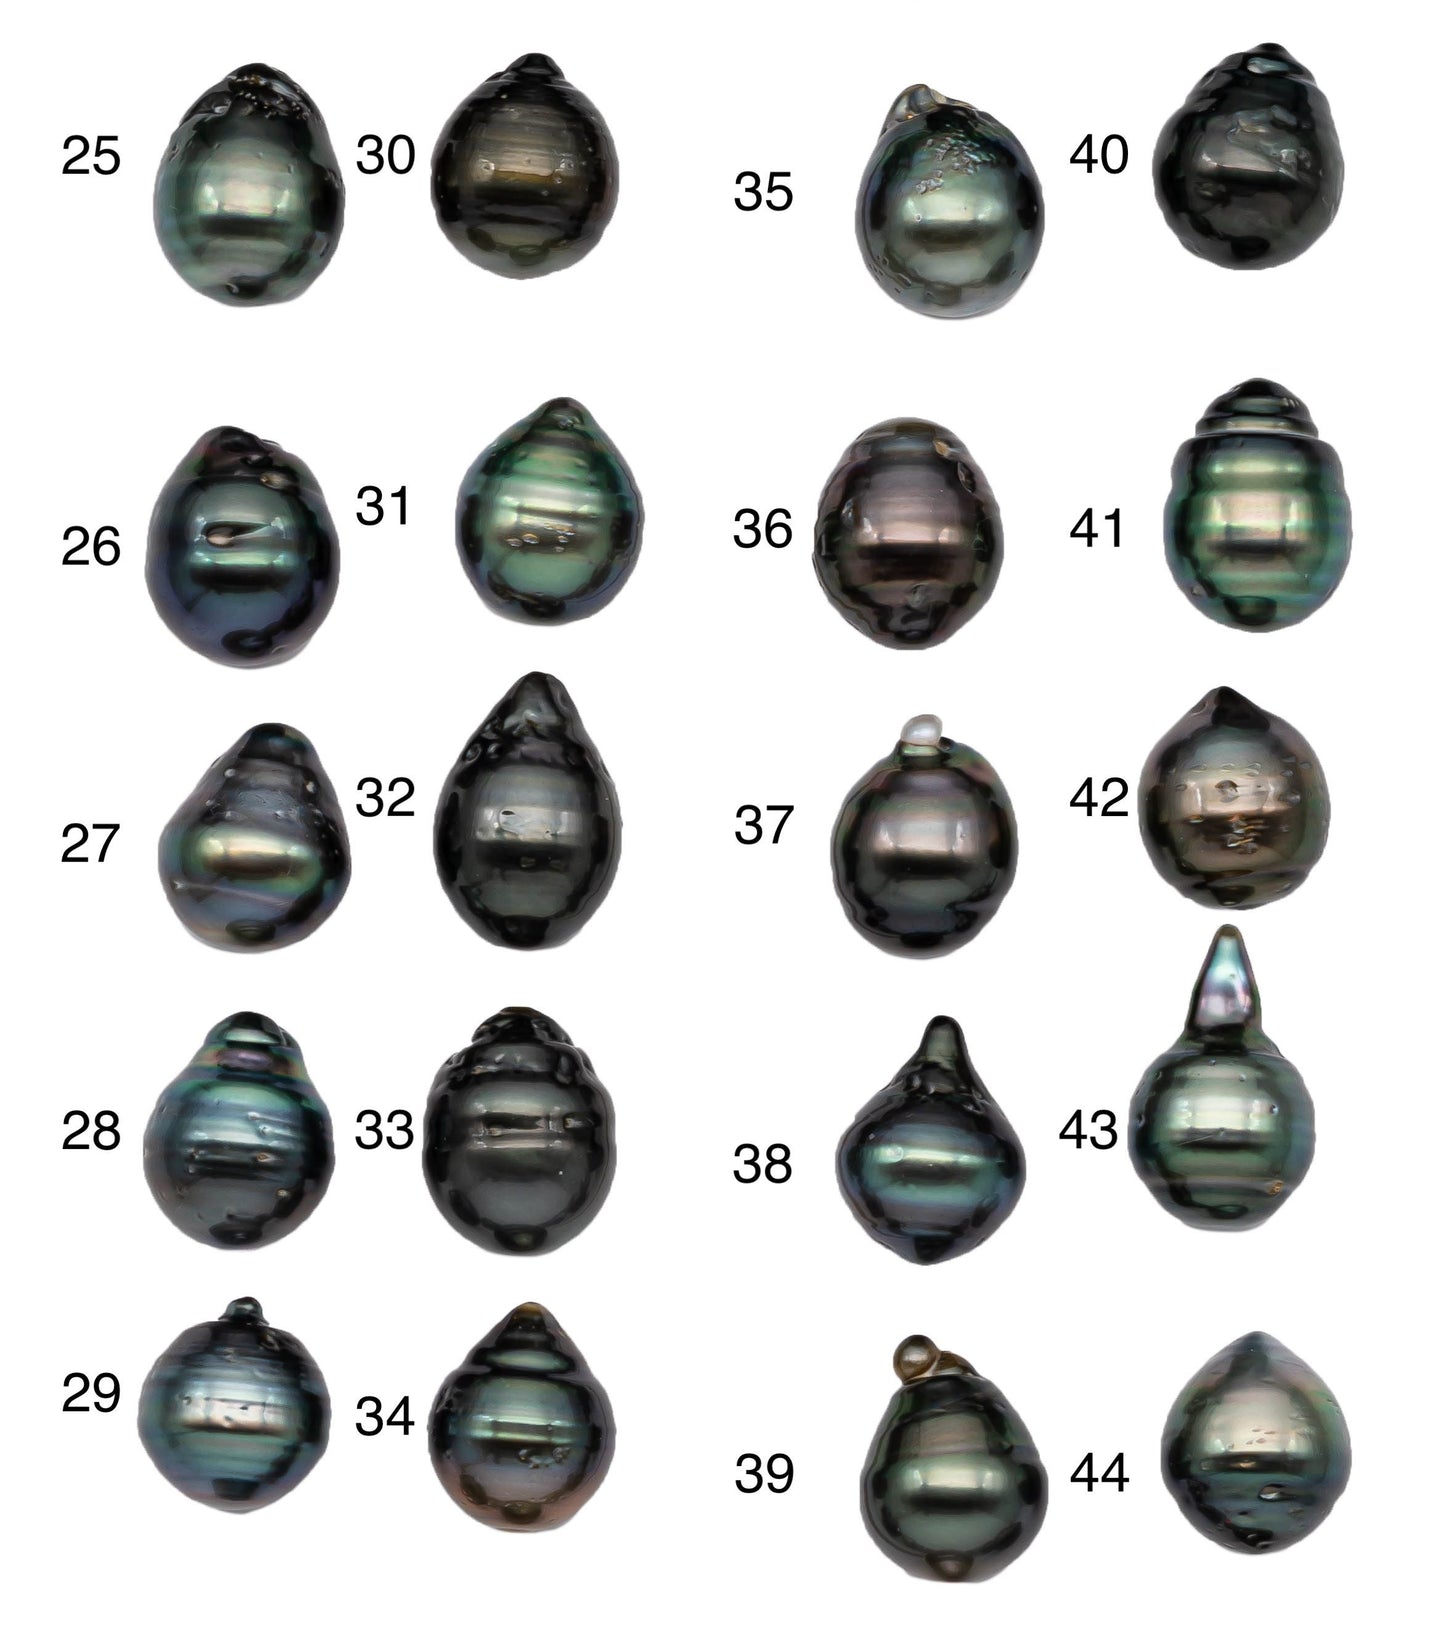 Single Drop Tahitian Pearl Natural Peacock Color Beautiful Luster and Blemishes, One Piece Loose Undrilled Pearl in 11-11.5mm, SKU#1084TH